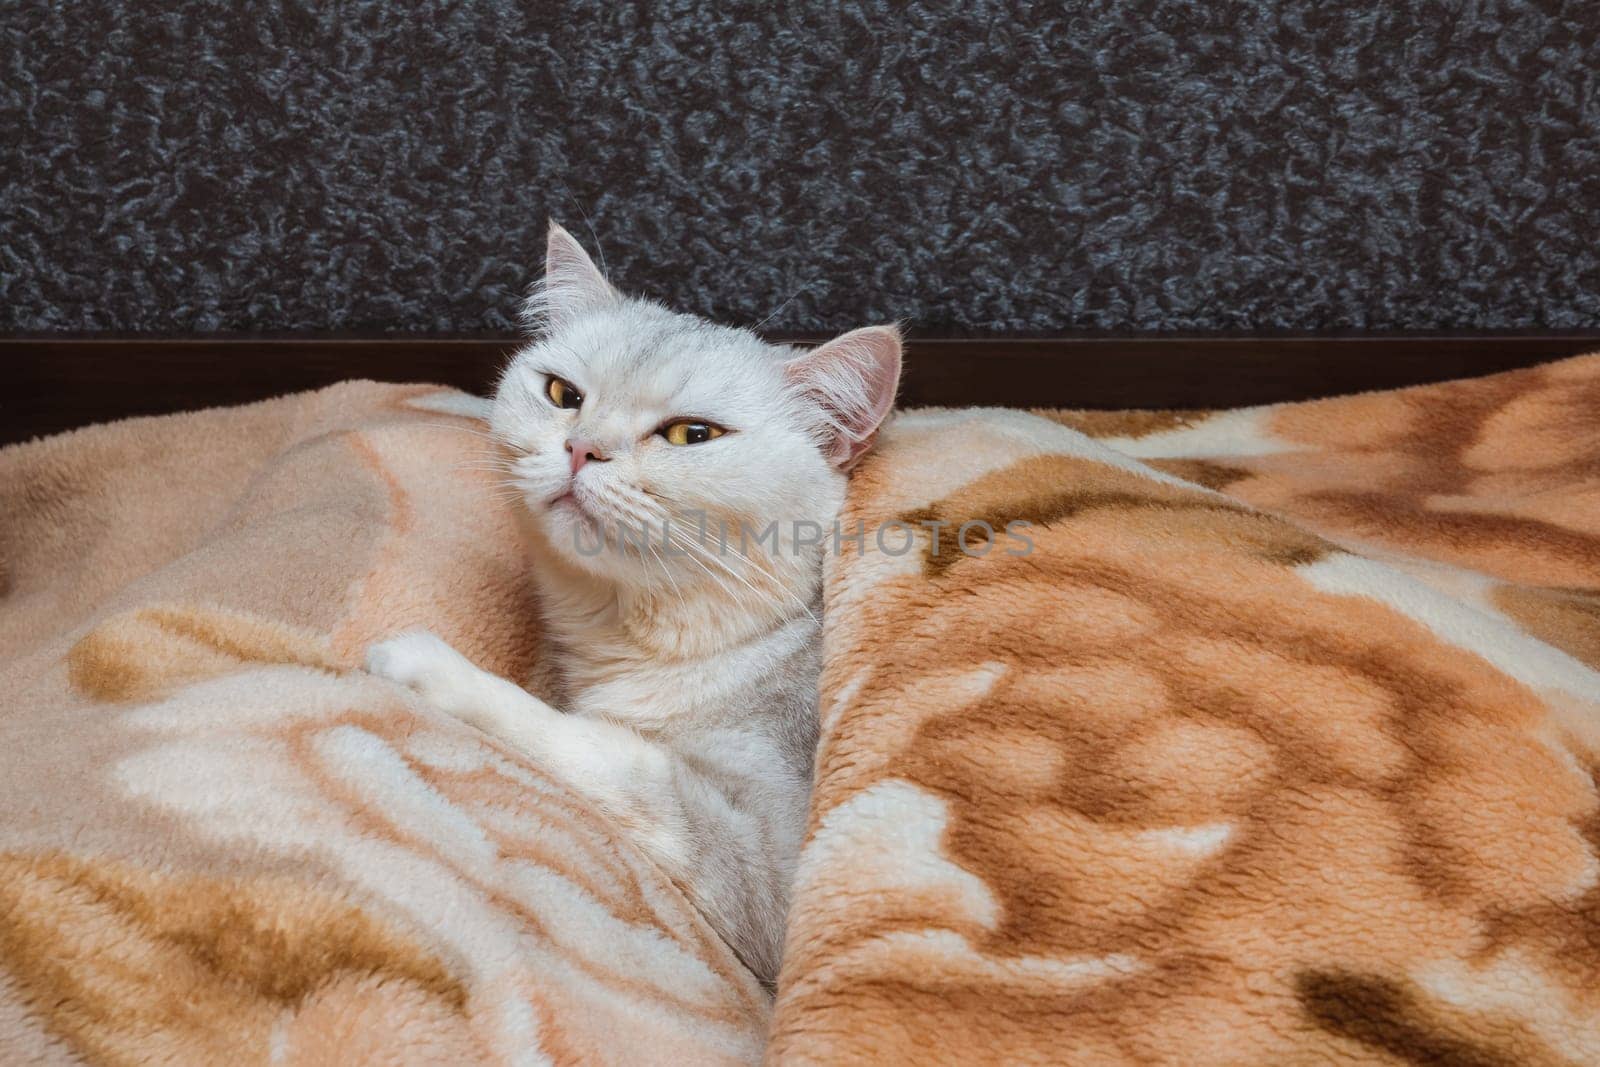 The awakened silver cat of the British breed lies on the bed under the blanket. Pets at home